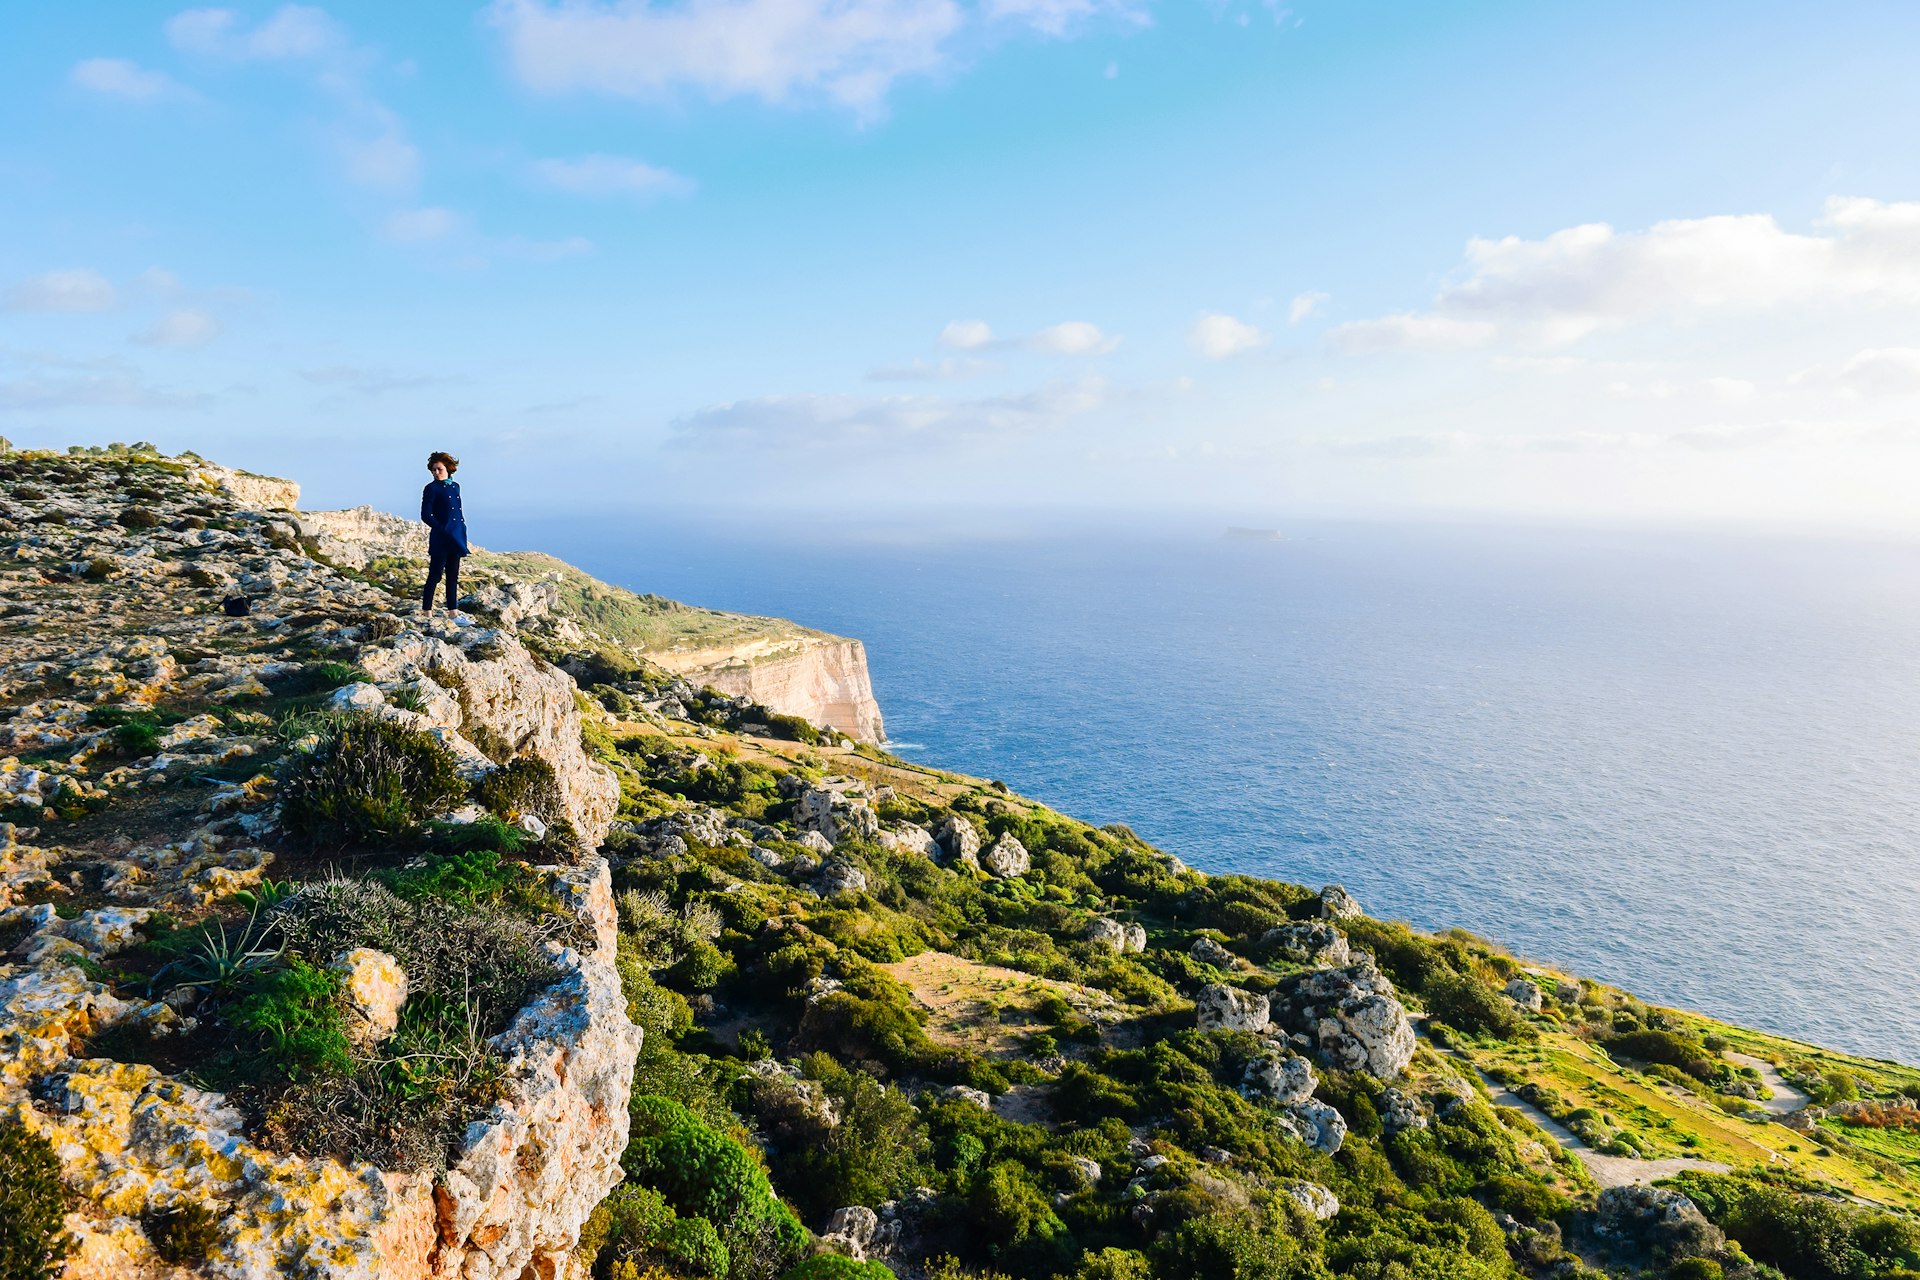 A young woman stands at a height overlooking the Dingli cliffs and the Mediterranean Sea. Her hair is blown by the wind.